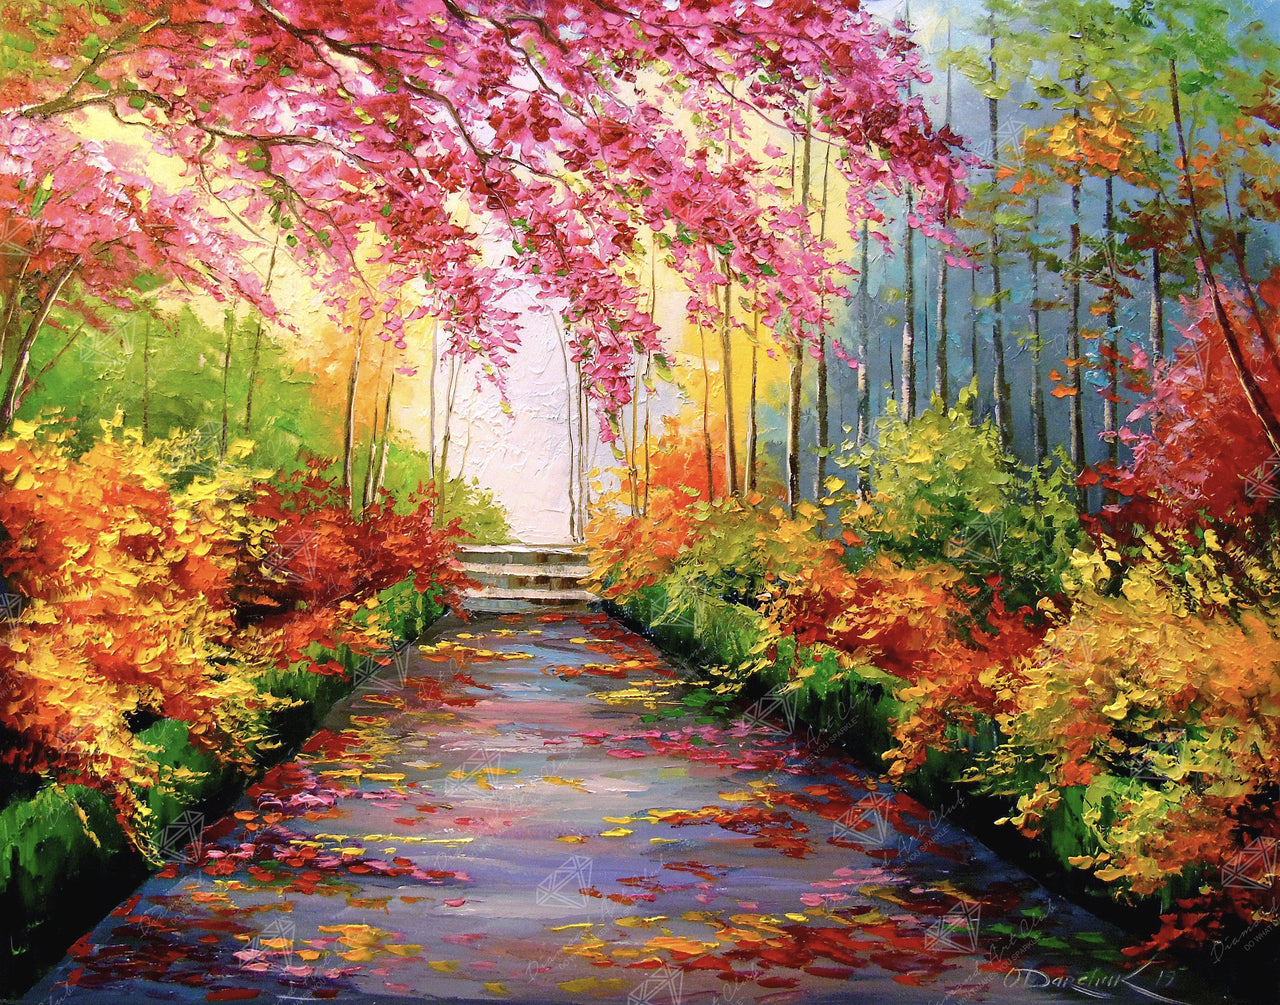 Diamond Painting Autumn Path 22" x 28″ (56cm x 71cm) / Round with 45 Colors including 2 ABs / 49,896